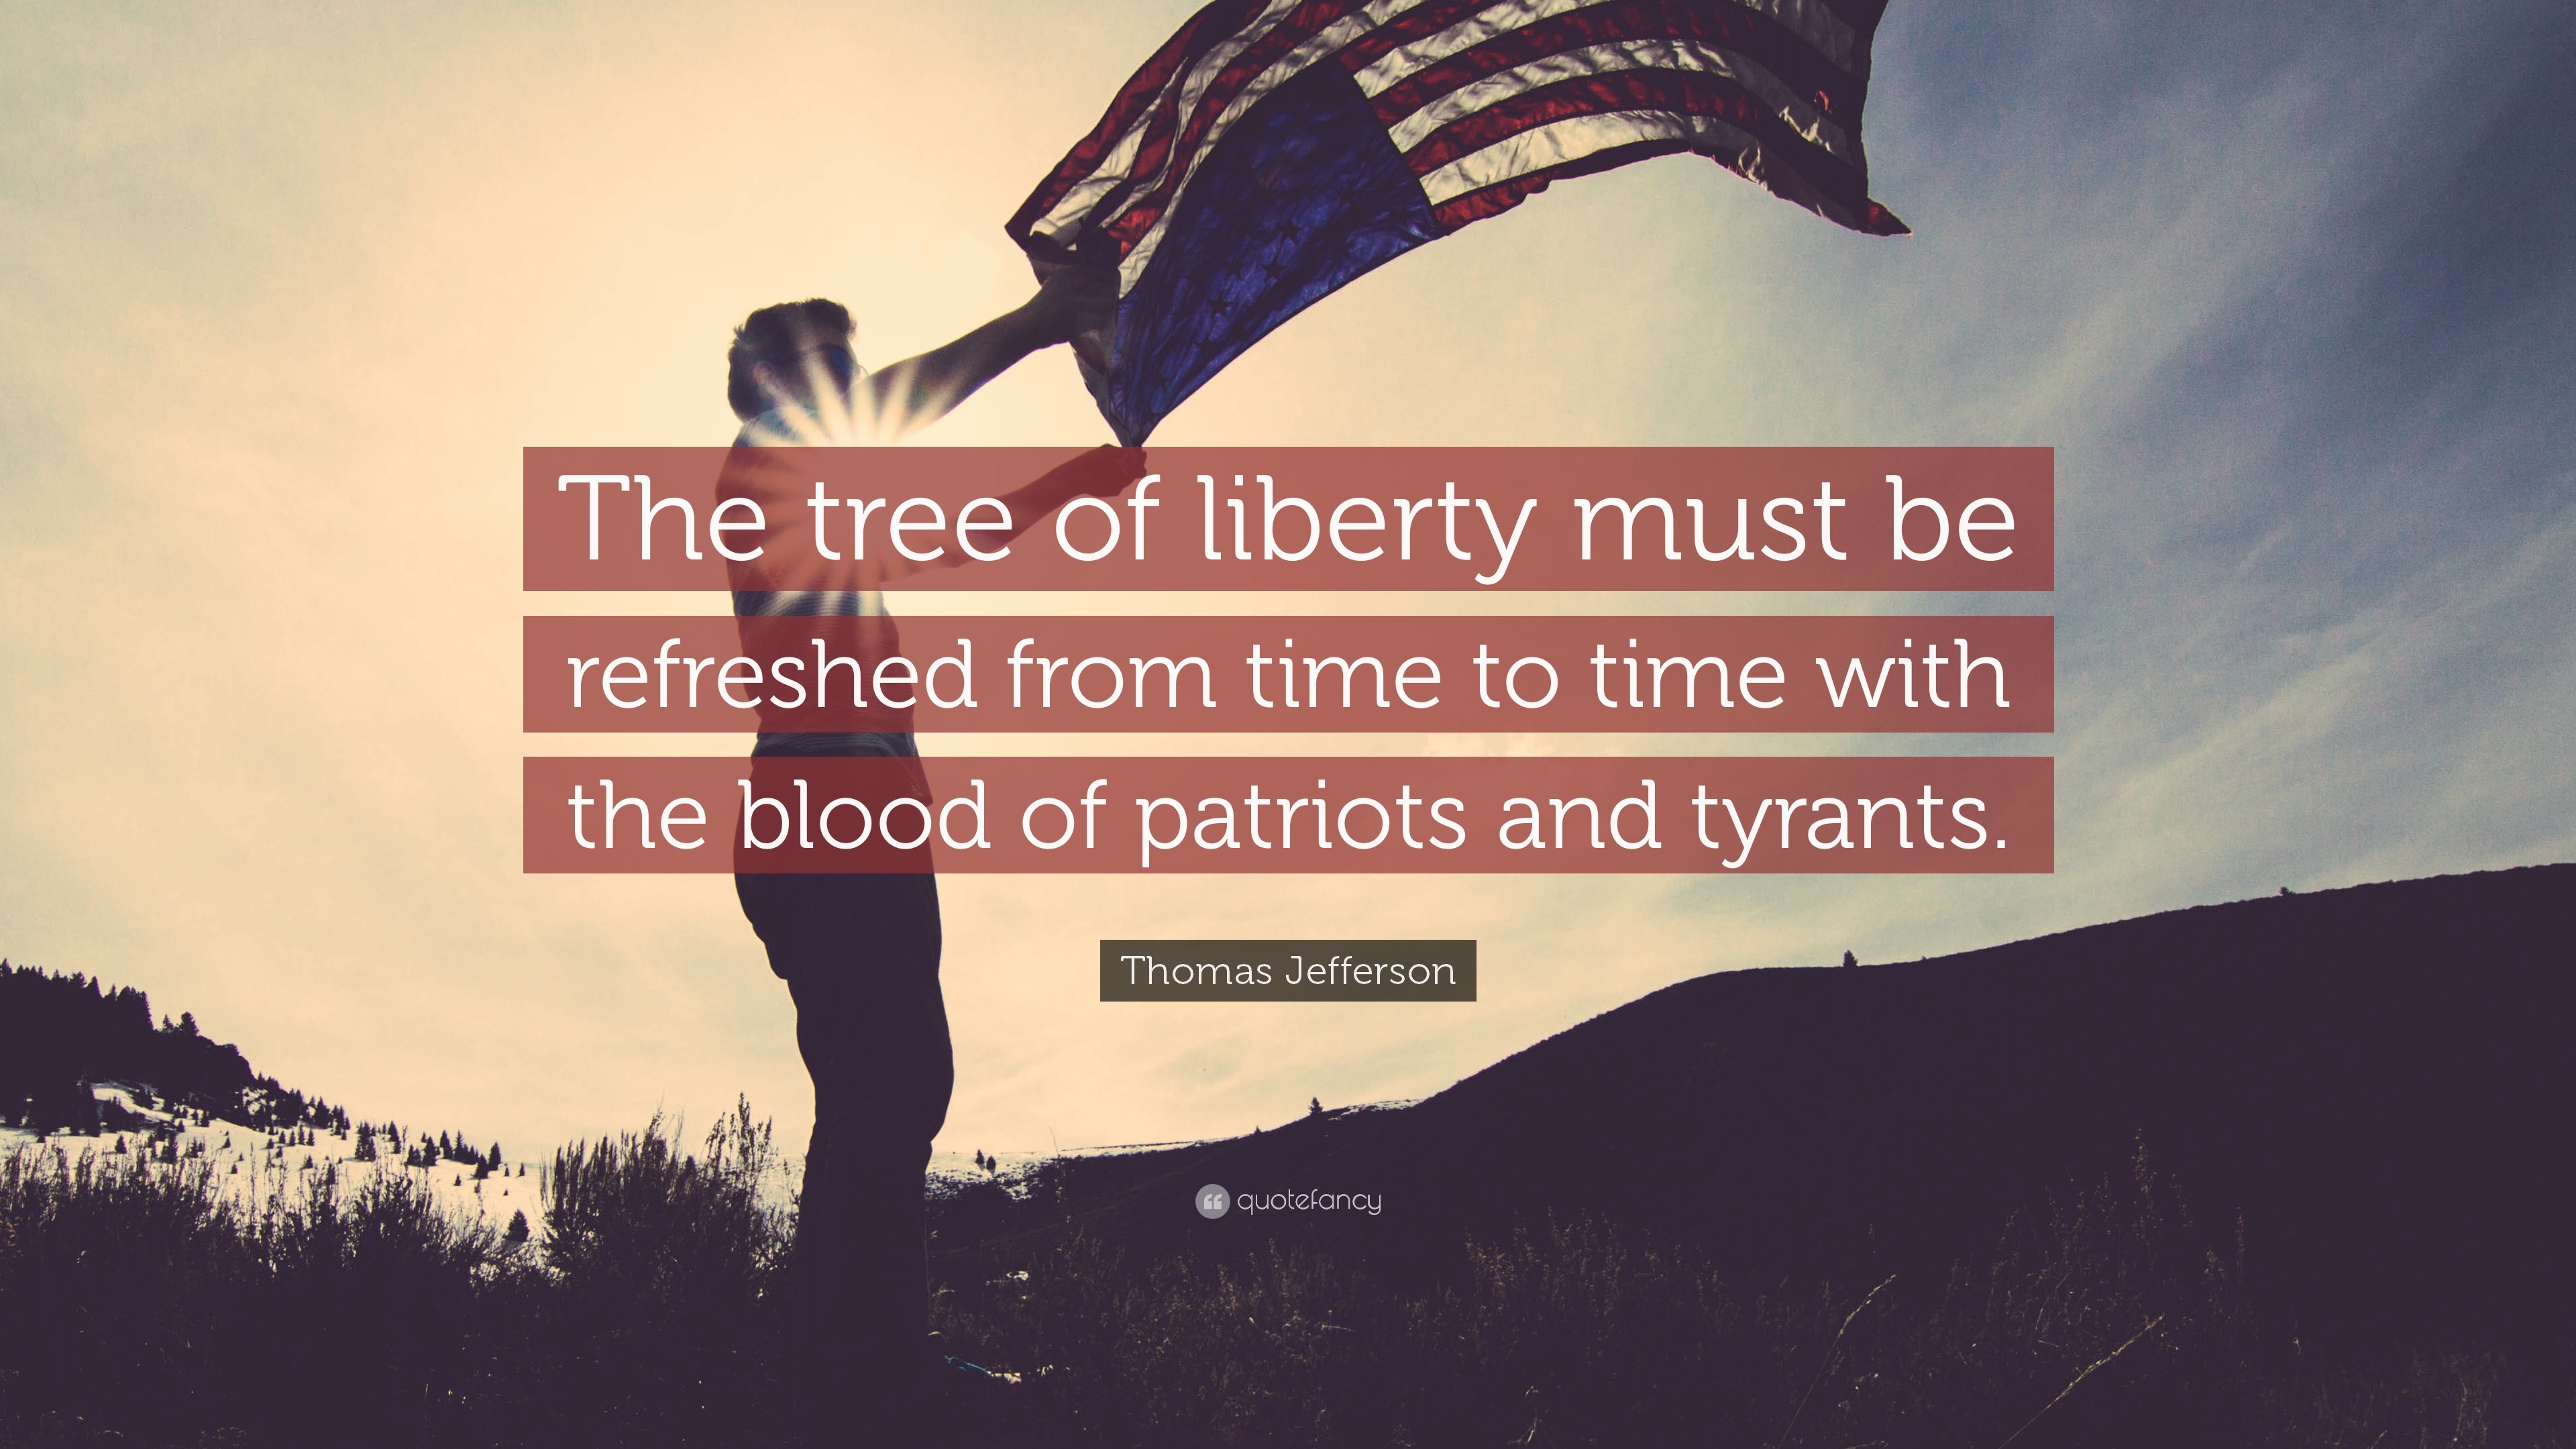 Thomas Jefferson Quote: “The tree of liberty must be refreshed from time to time with the blood of patriots and tyrants.” (25 wallpapers) - Quotefancy